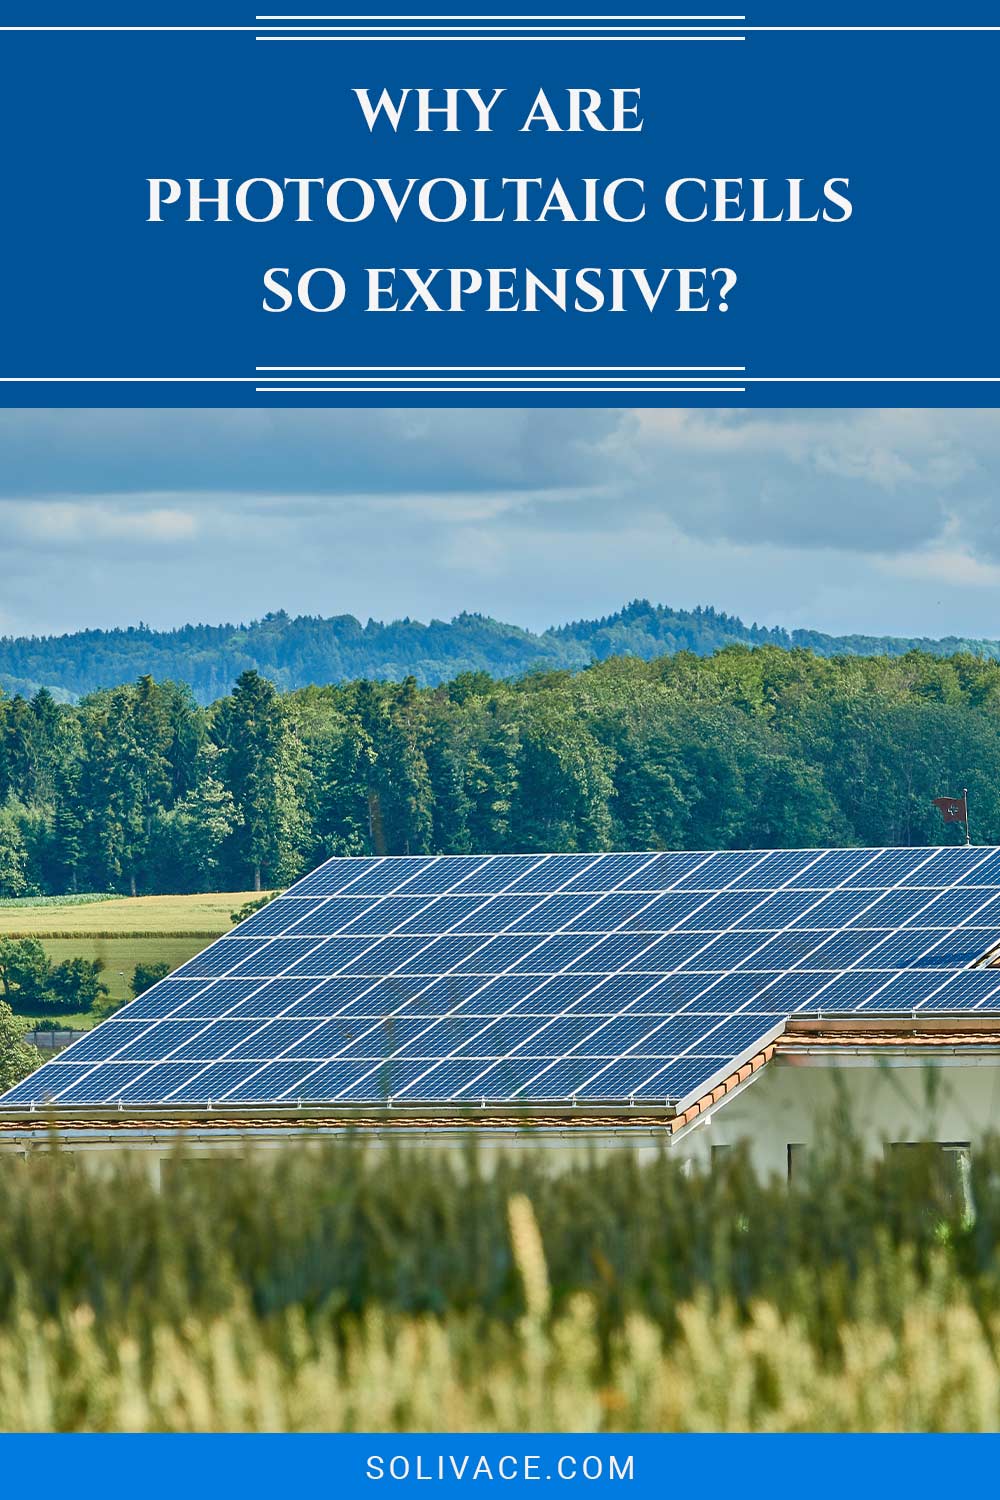 Why Are Photovoltaic Cells So Expensive?